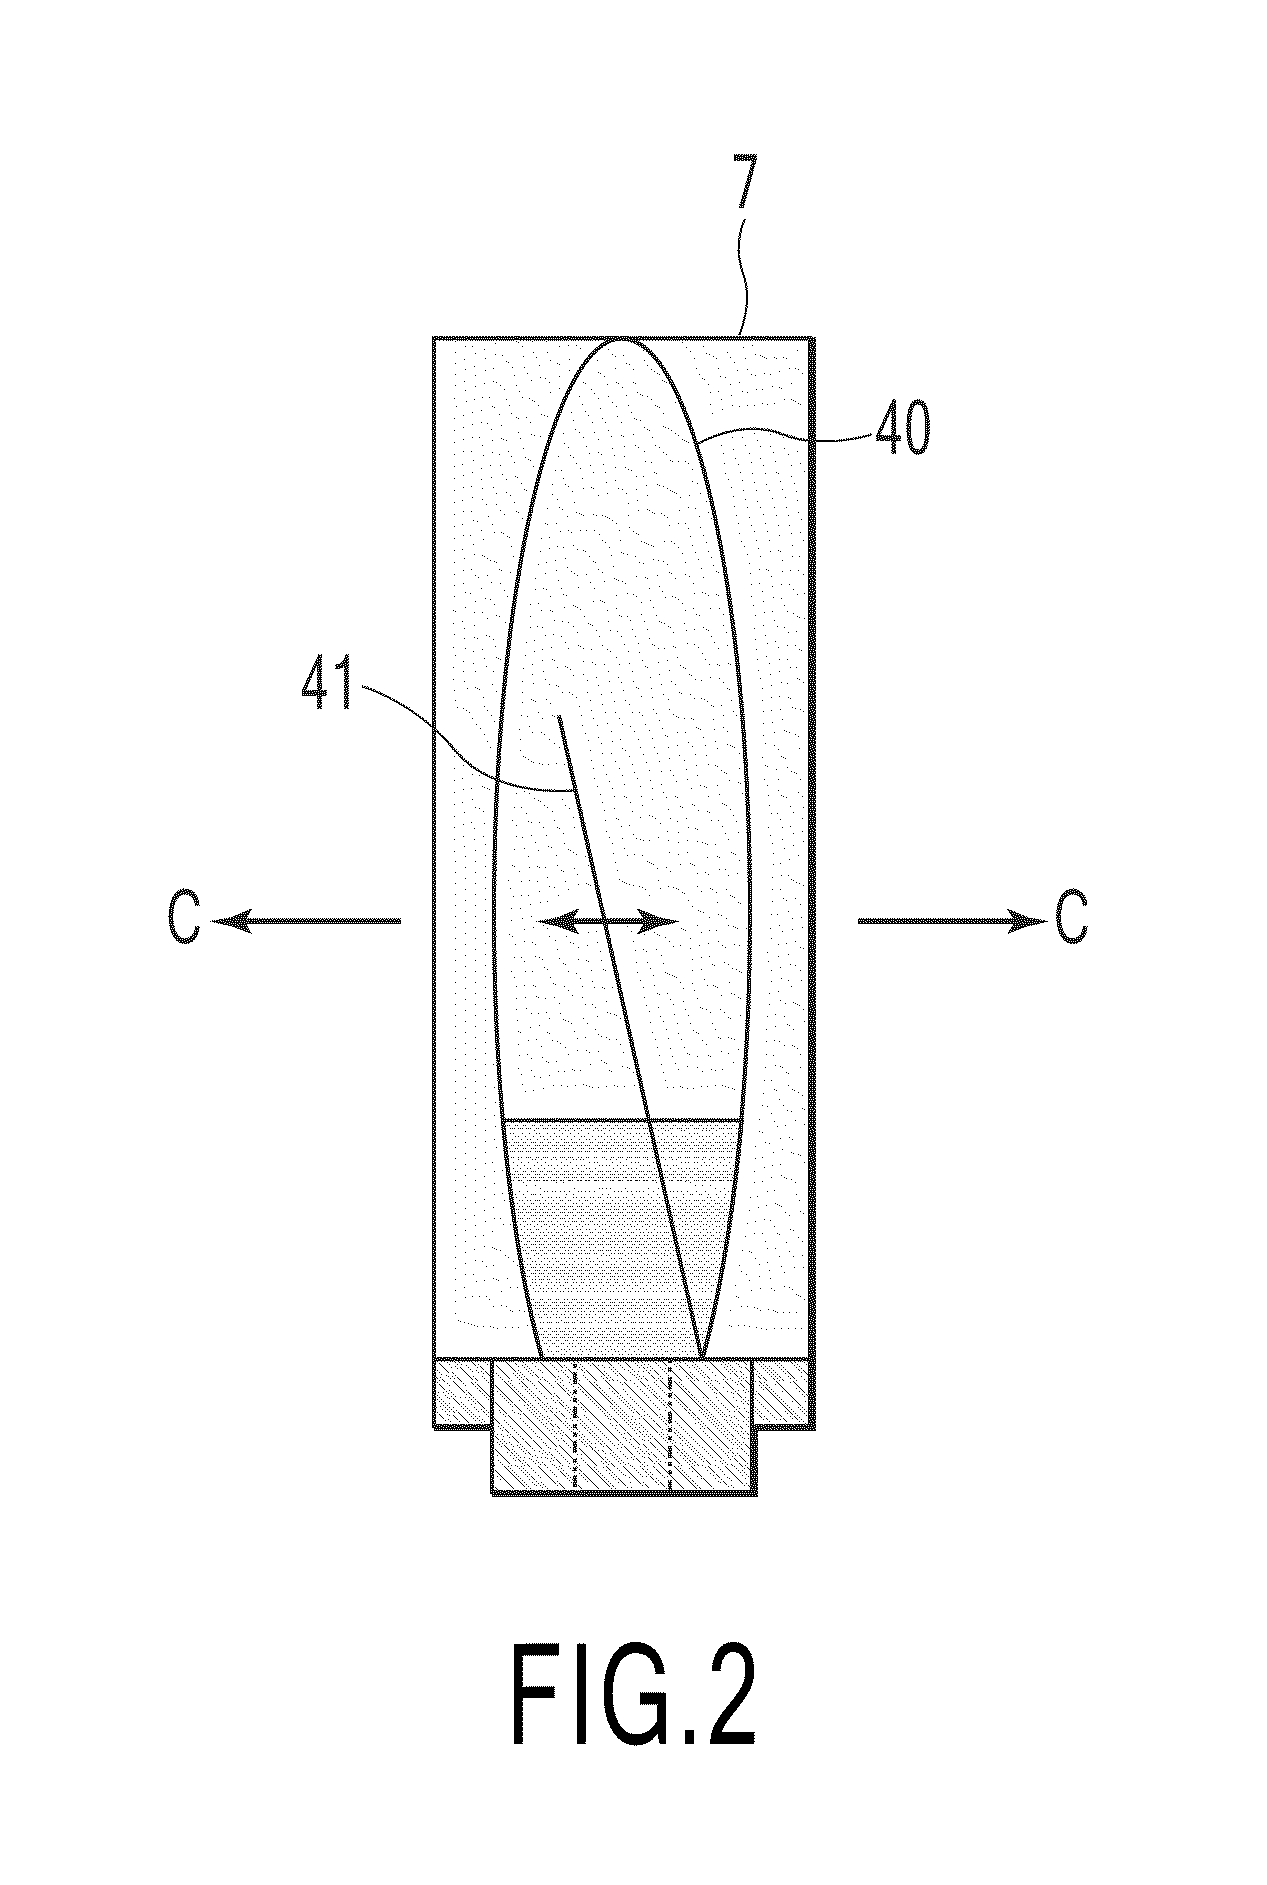 Inkjet printing apparatus and method for agitating ink